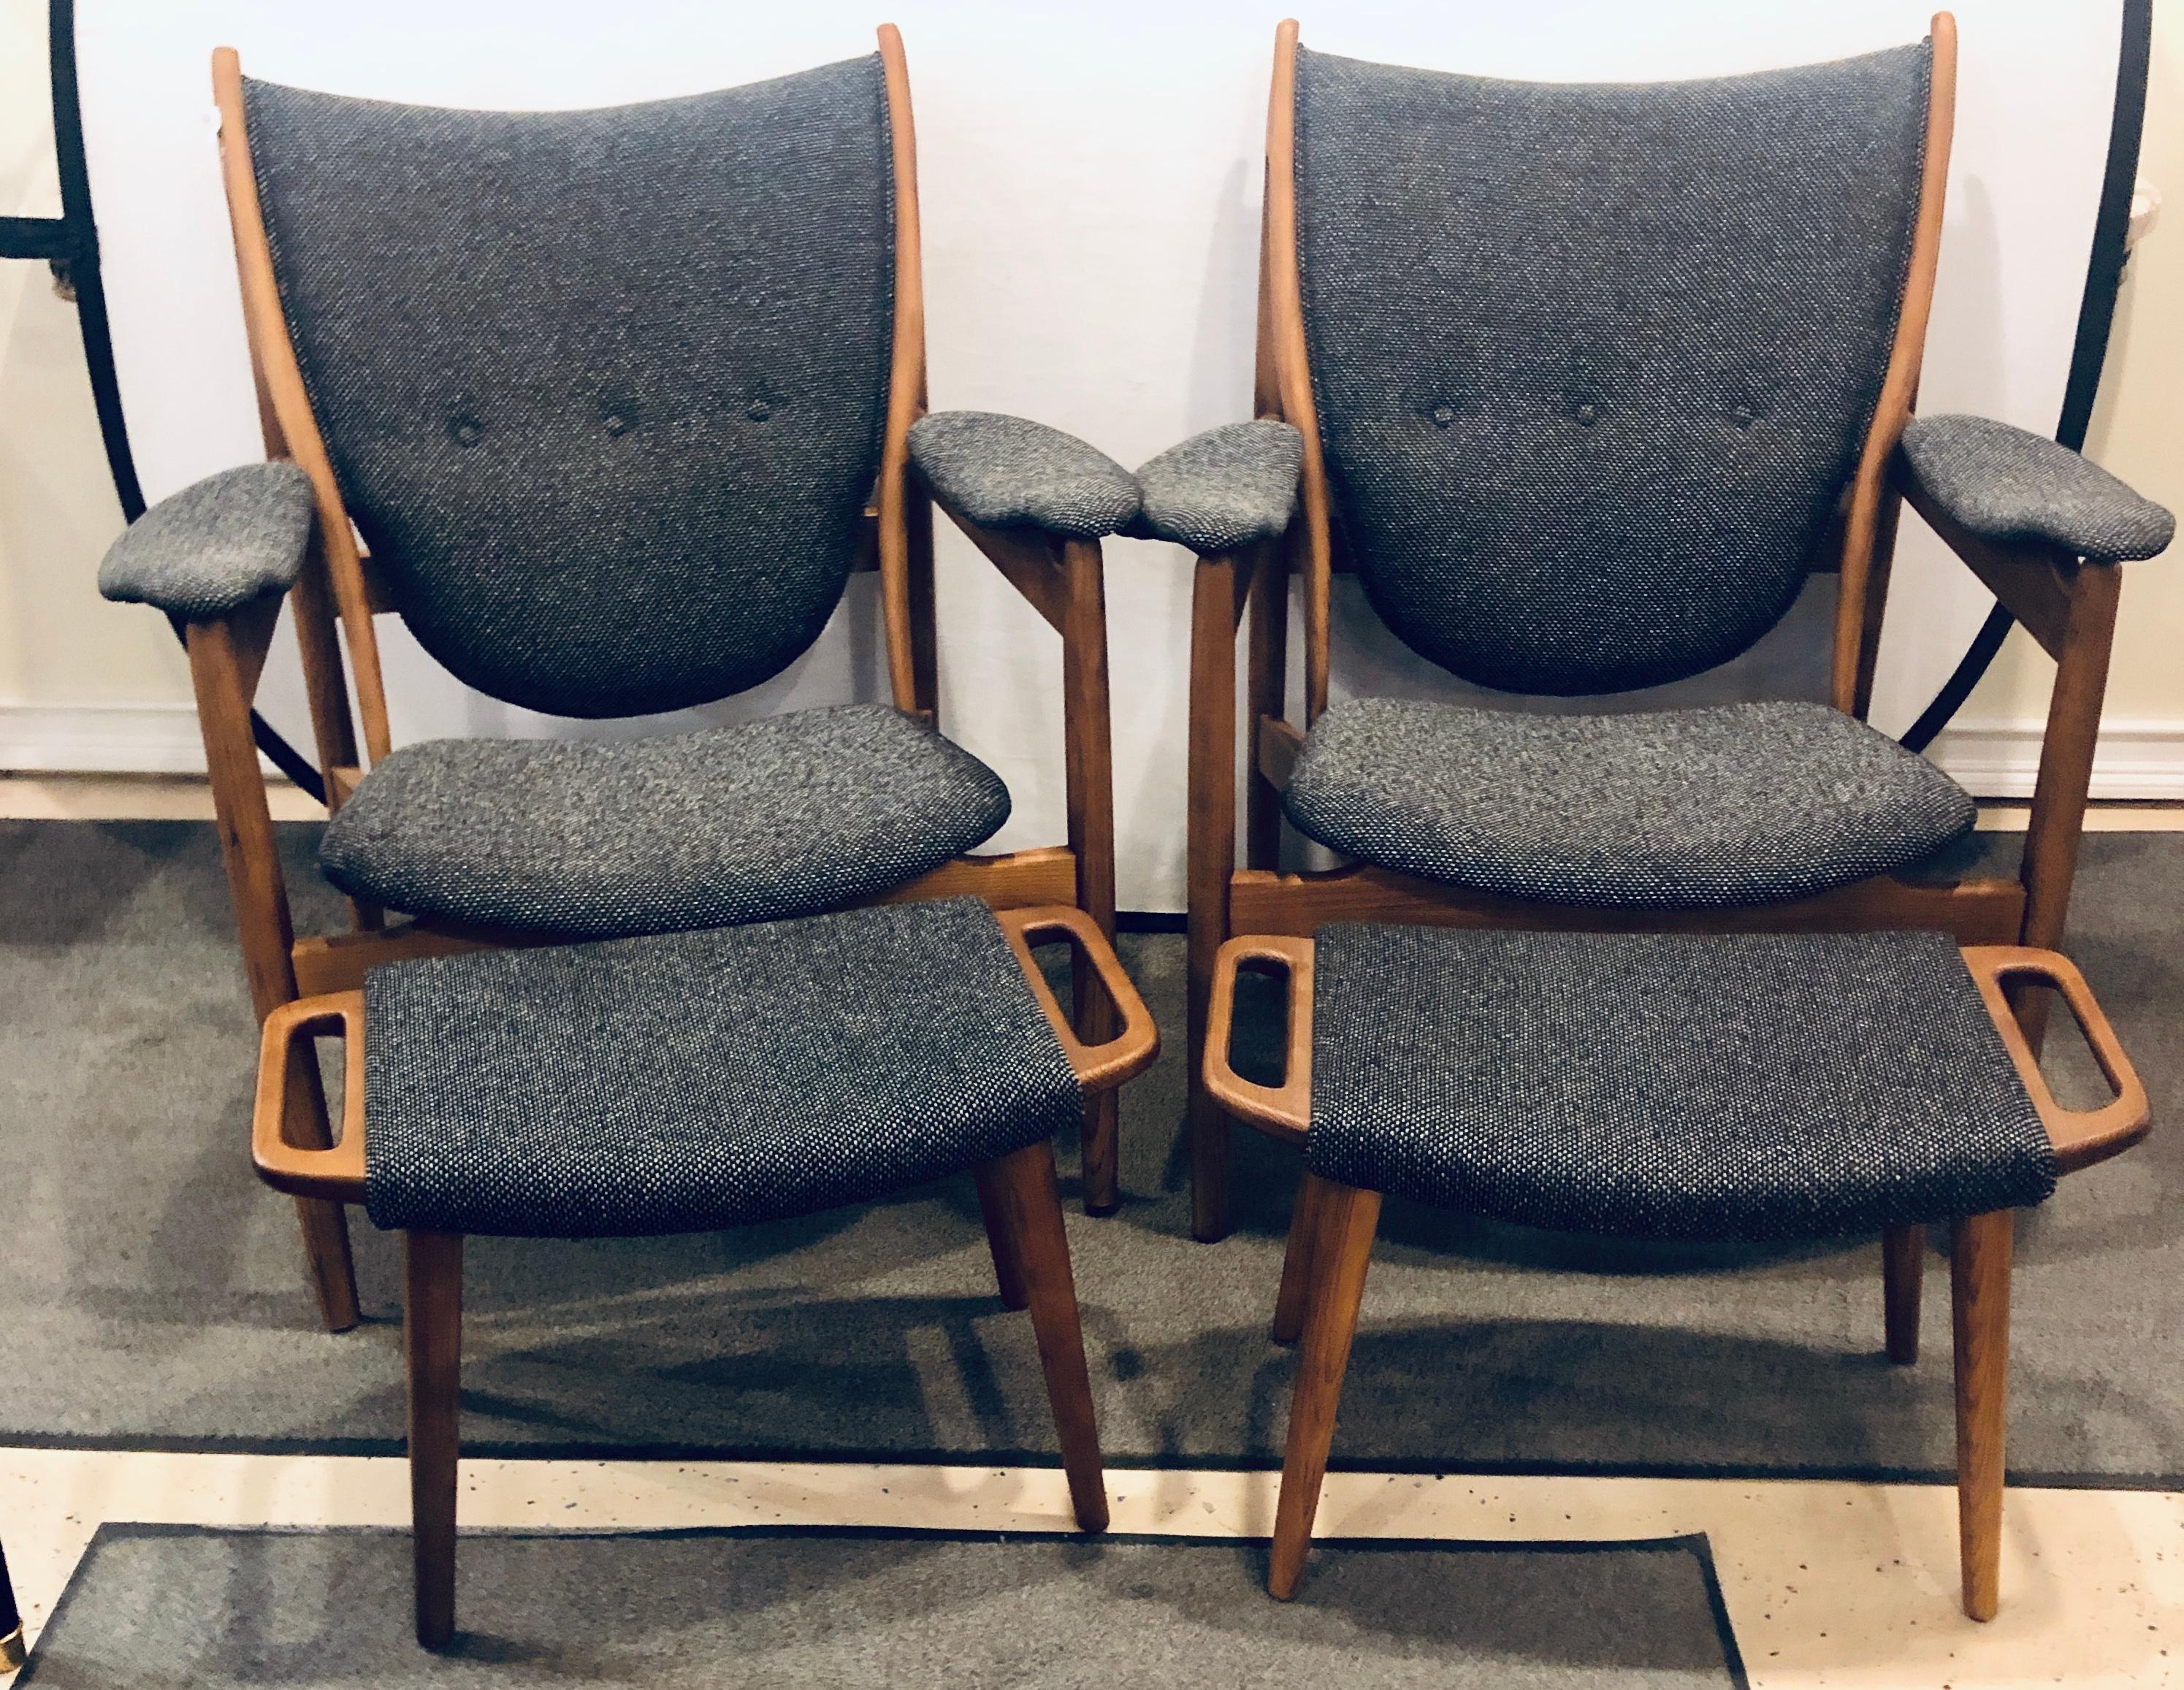 Pair of Mid-Century Modern arm chairs along with ottomans. Each in a fine newly Upholstered fabric having a Graphite Tweed. The pair having wide sturdy seats. 

Measures: Chair: 37 inches H x 33 inches W x 28 inches D
Ottoman: 15 1/2 inches H x